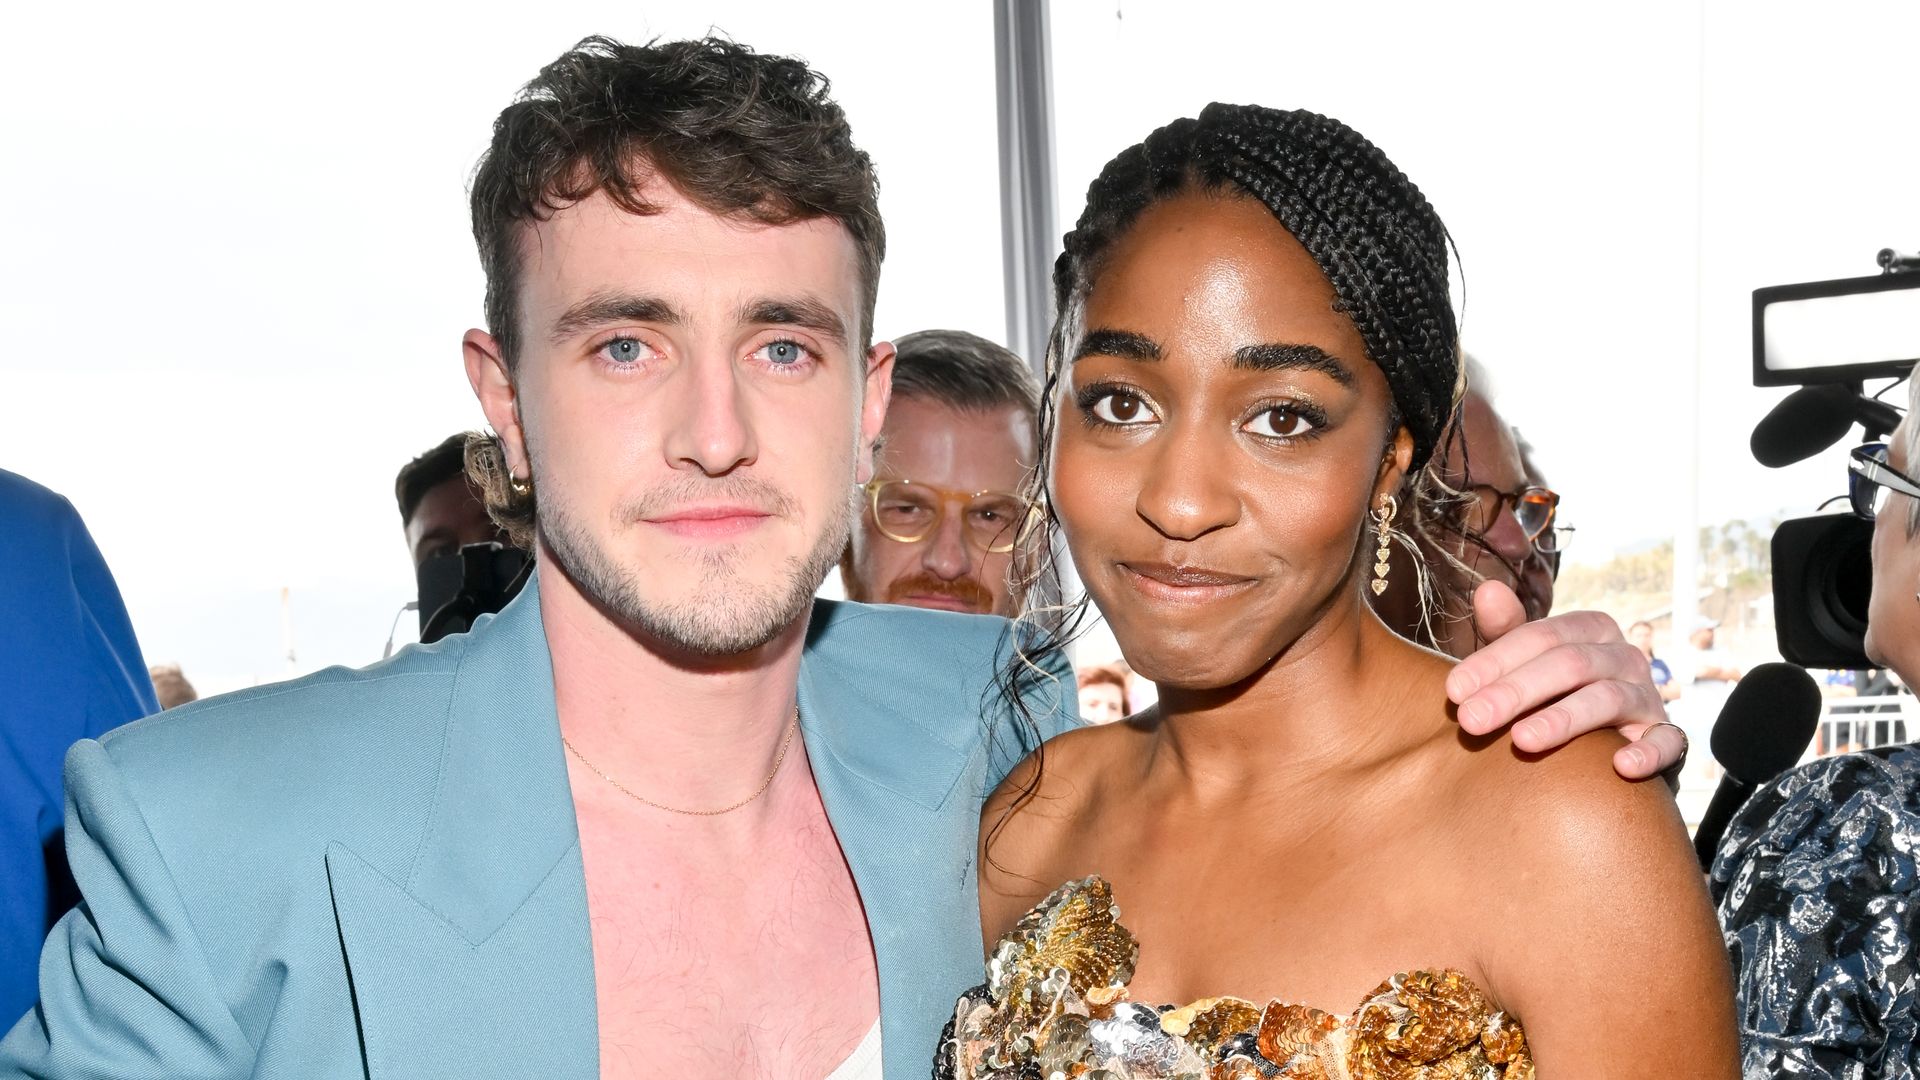 Paul Mescal and Ayo Edebiri at the 2023 Film Independent Spirit Awards held on March 4, 2023 in Santa Monica, California. (Photo by Michael Buckner/Variety via Getty Images)